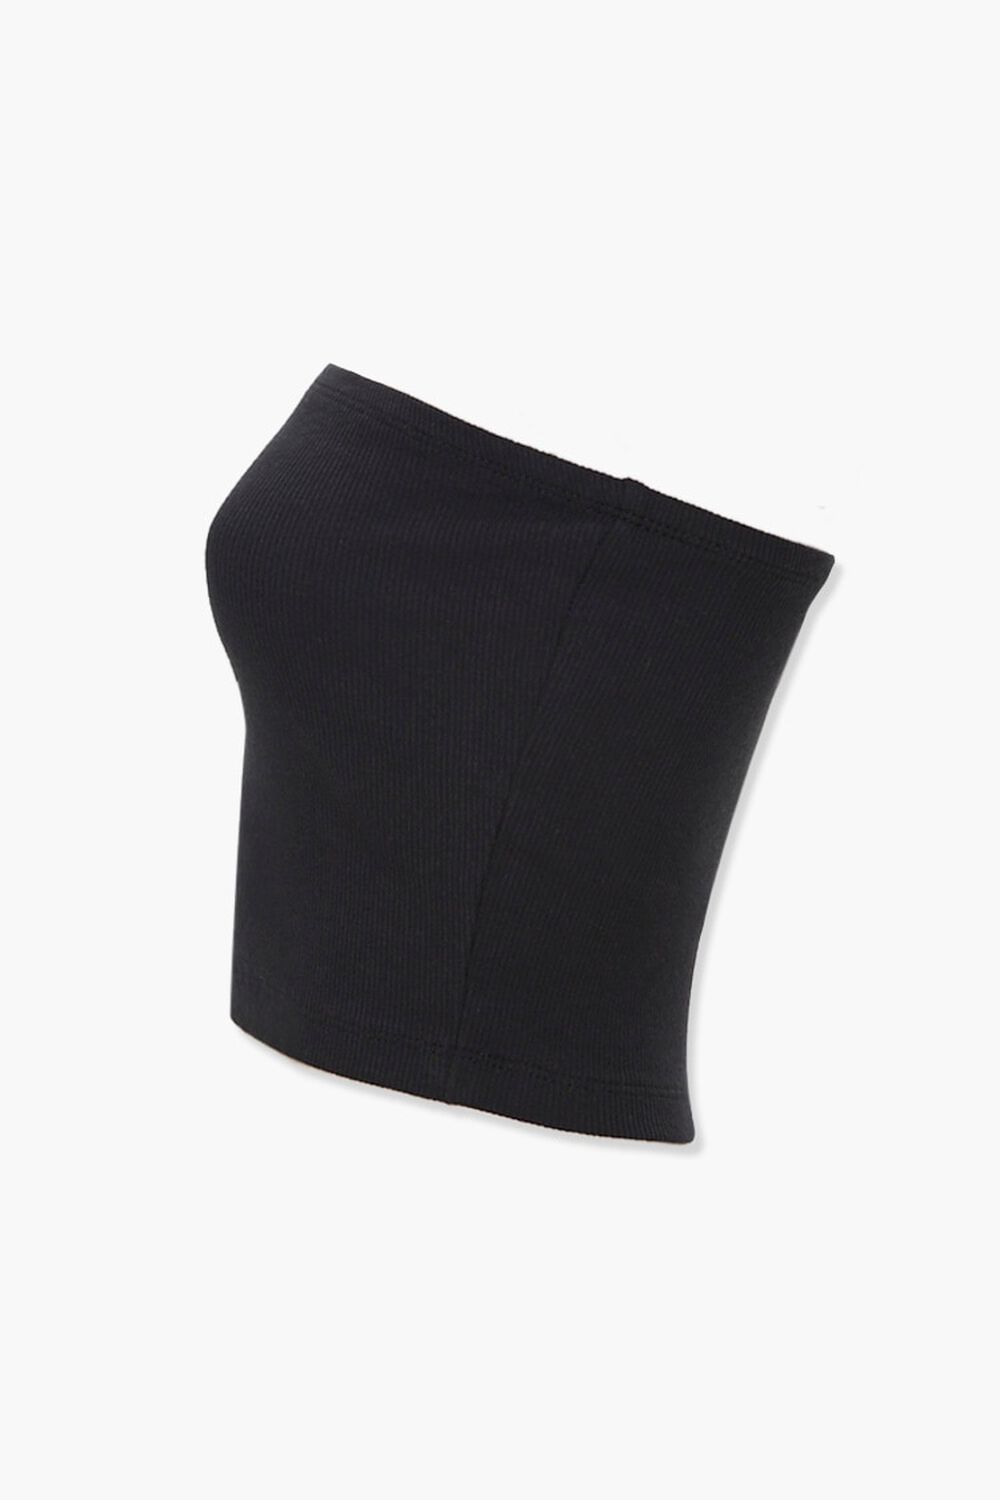 Cotton-Blend Cropped Tube Top, image 2